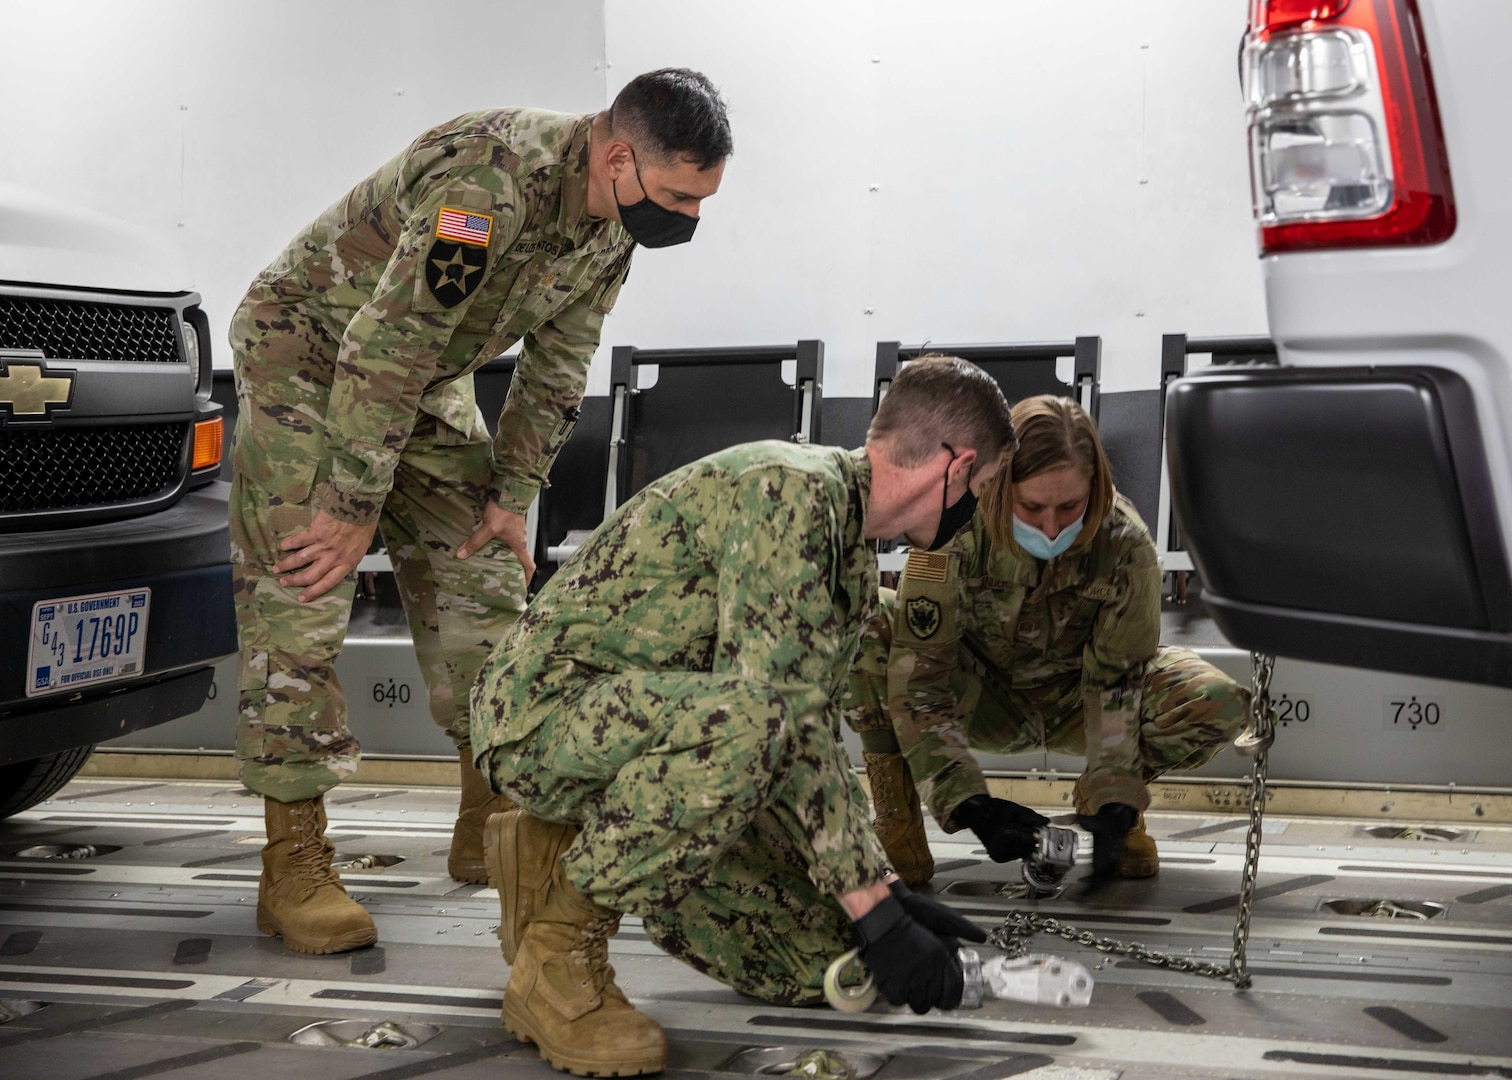 U.S. Air Force Master Sgt. Christina Anders, assigned to Joint Task Force Civil Support (JTF-CS), demonstrates how to tie down a fleet vehicle to U.S. Navy Lt. Cmdr. Stanley Worthington and U.S. Army Maj. Jason De Los Santos inside a C-17 Globemaster III trainer at Fort Lee, Va. during load training as part of Exercise KODA.